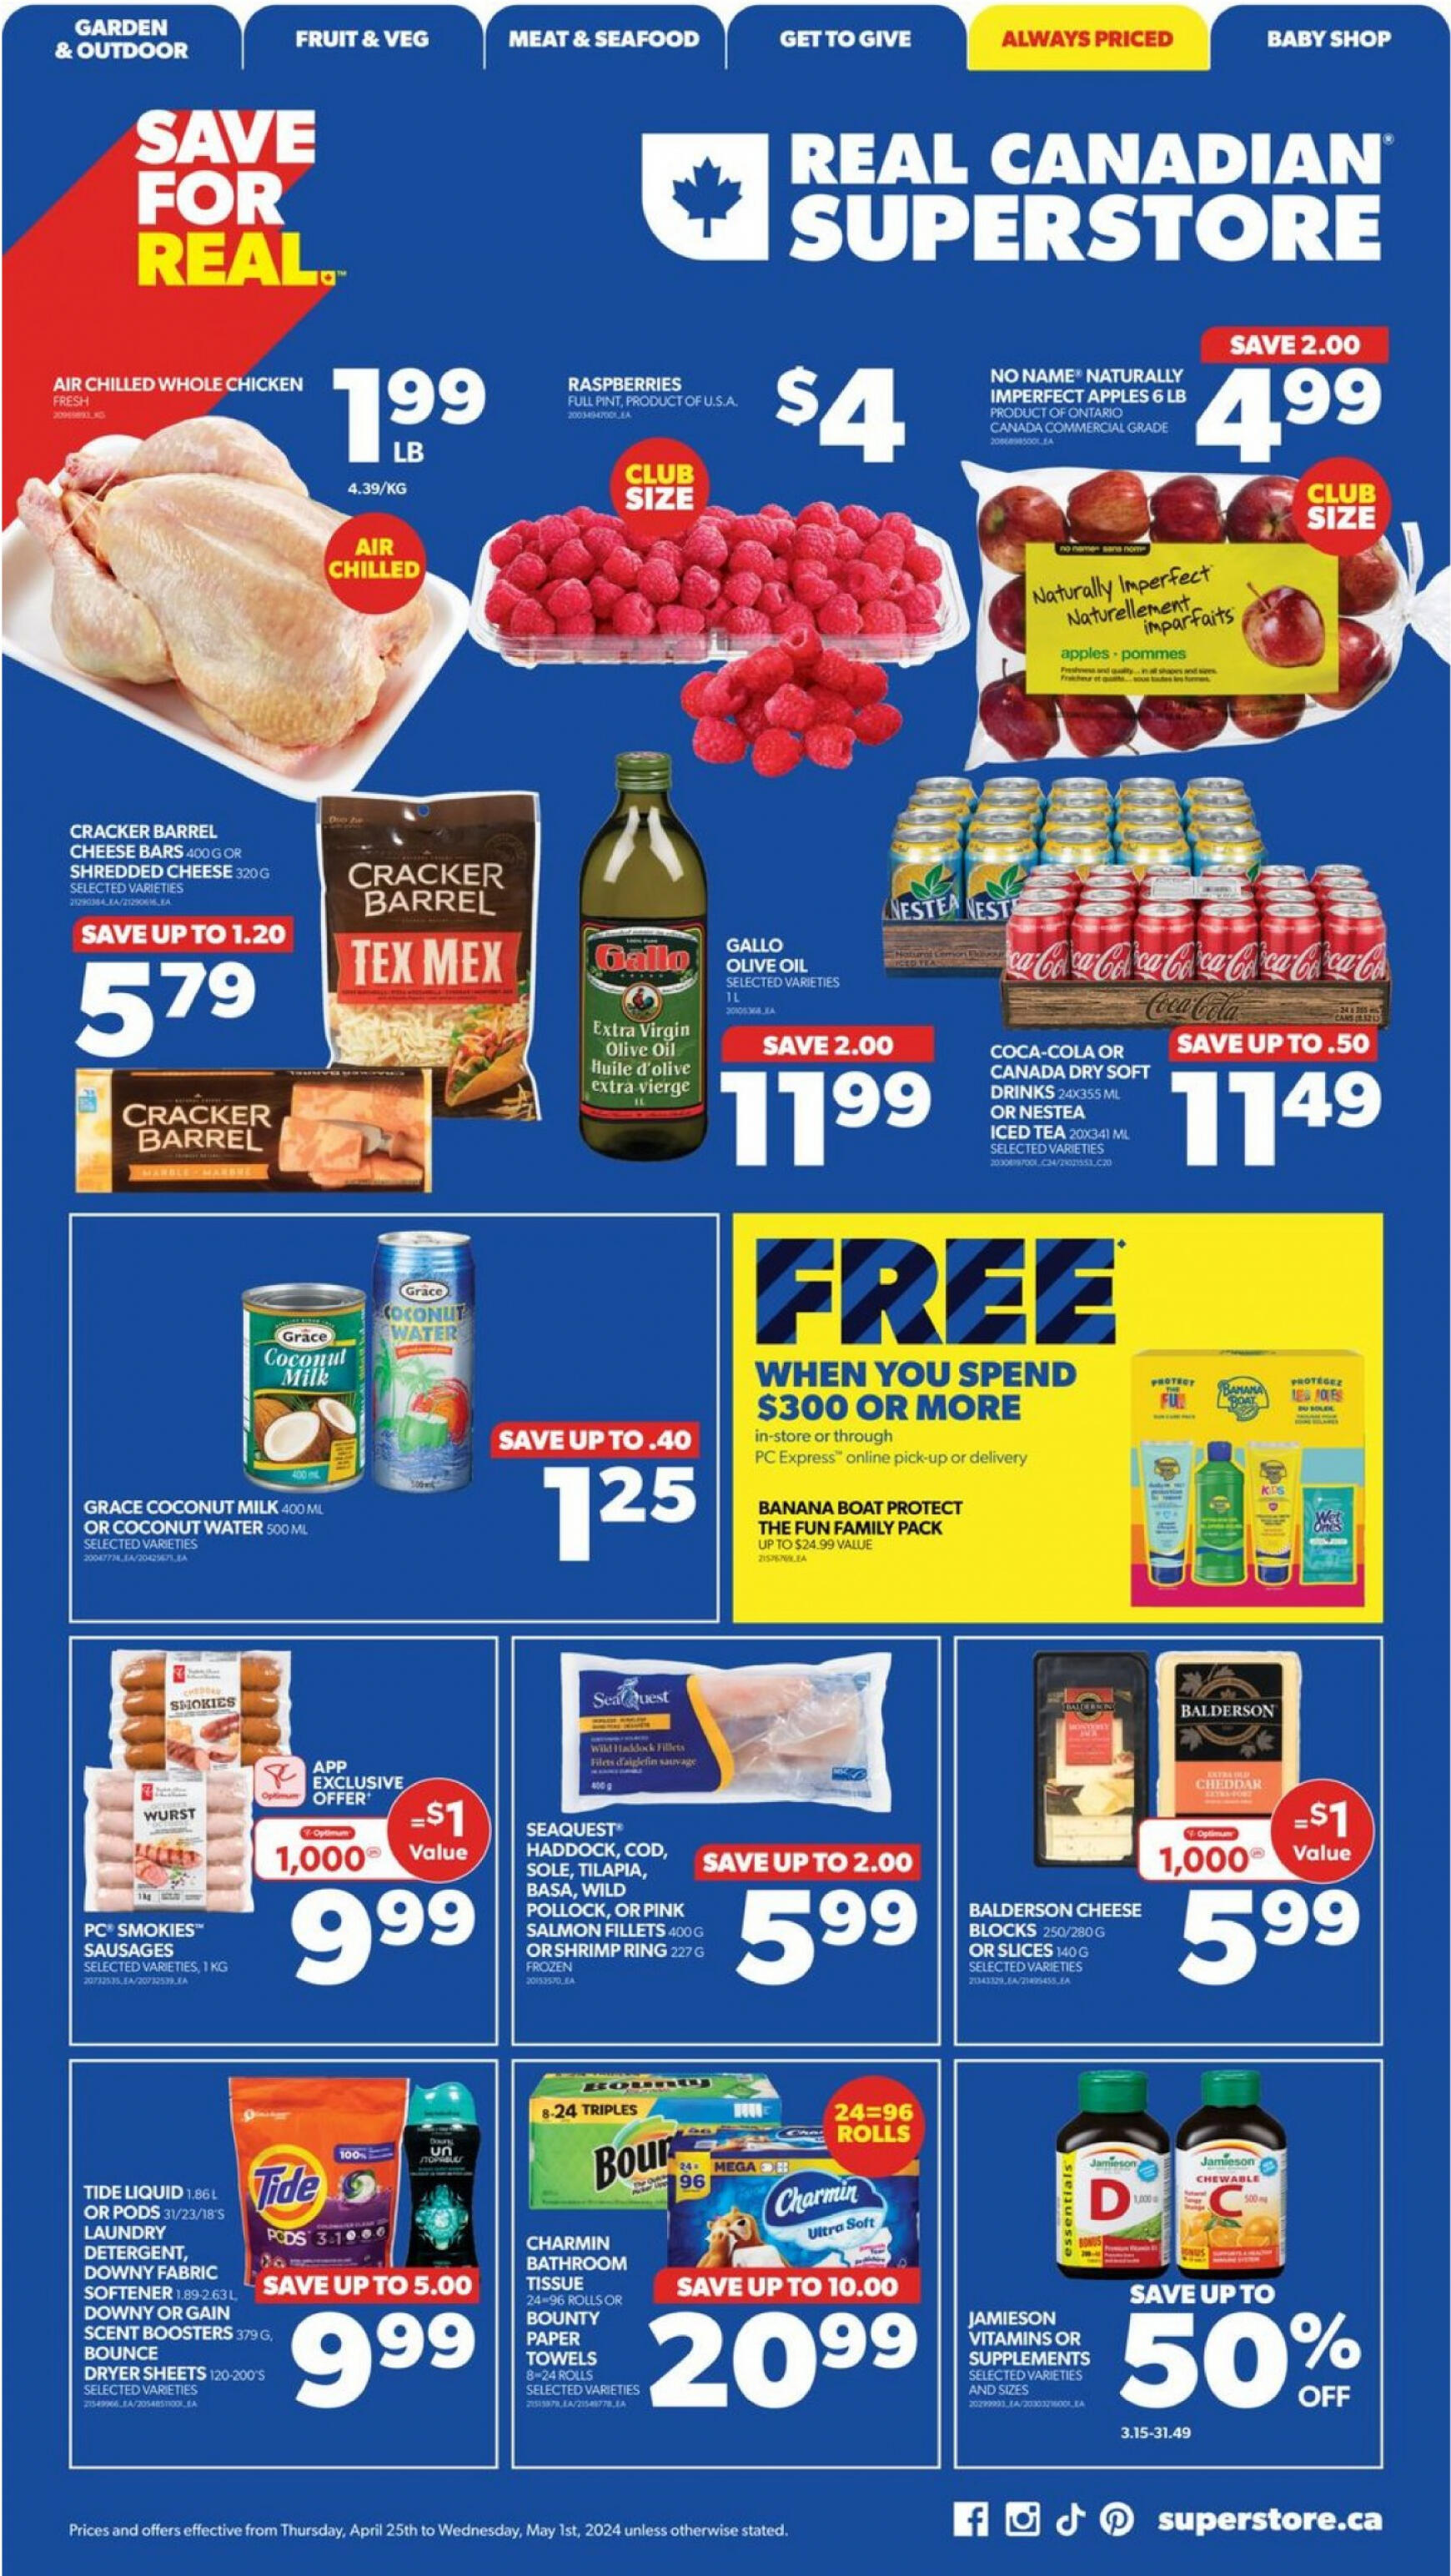 real-canadian-superstore - Real Canadian Superstore flyer current 25.04. - 01.05.